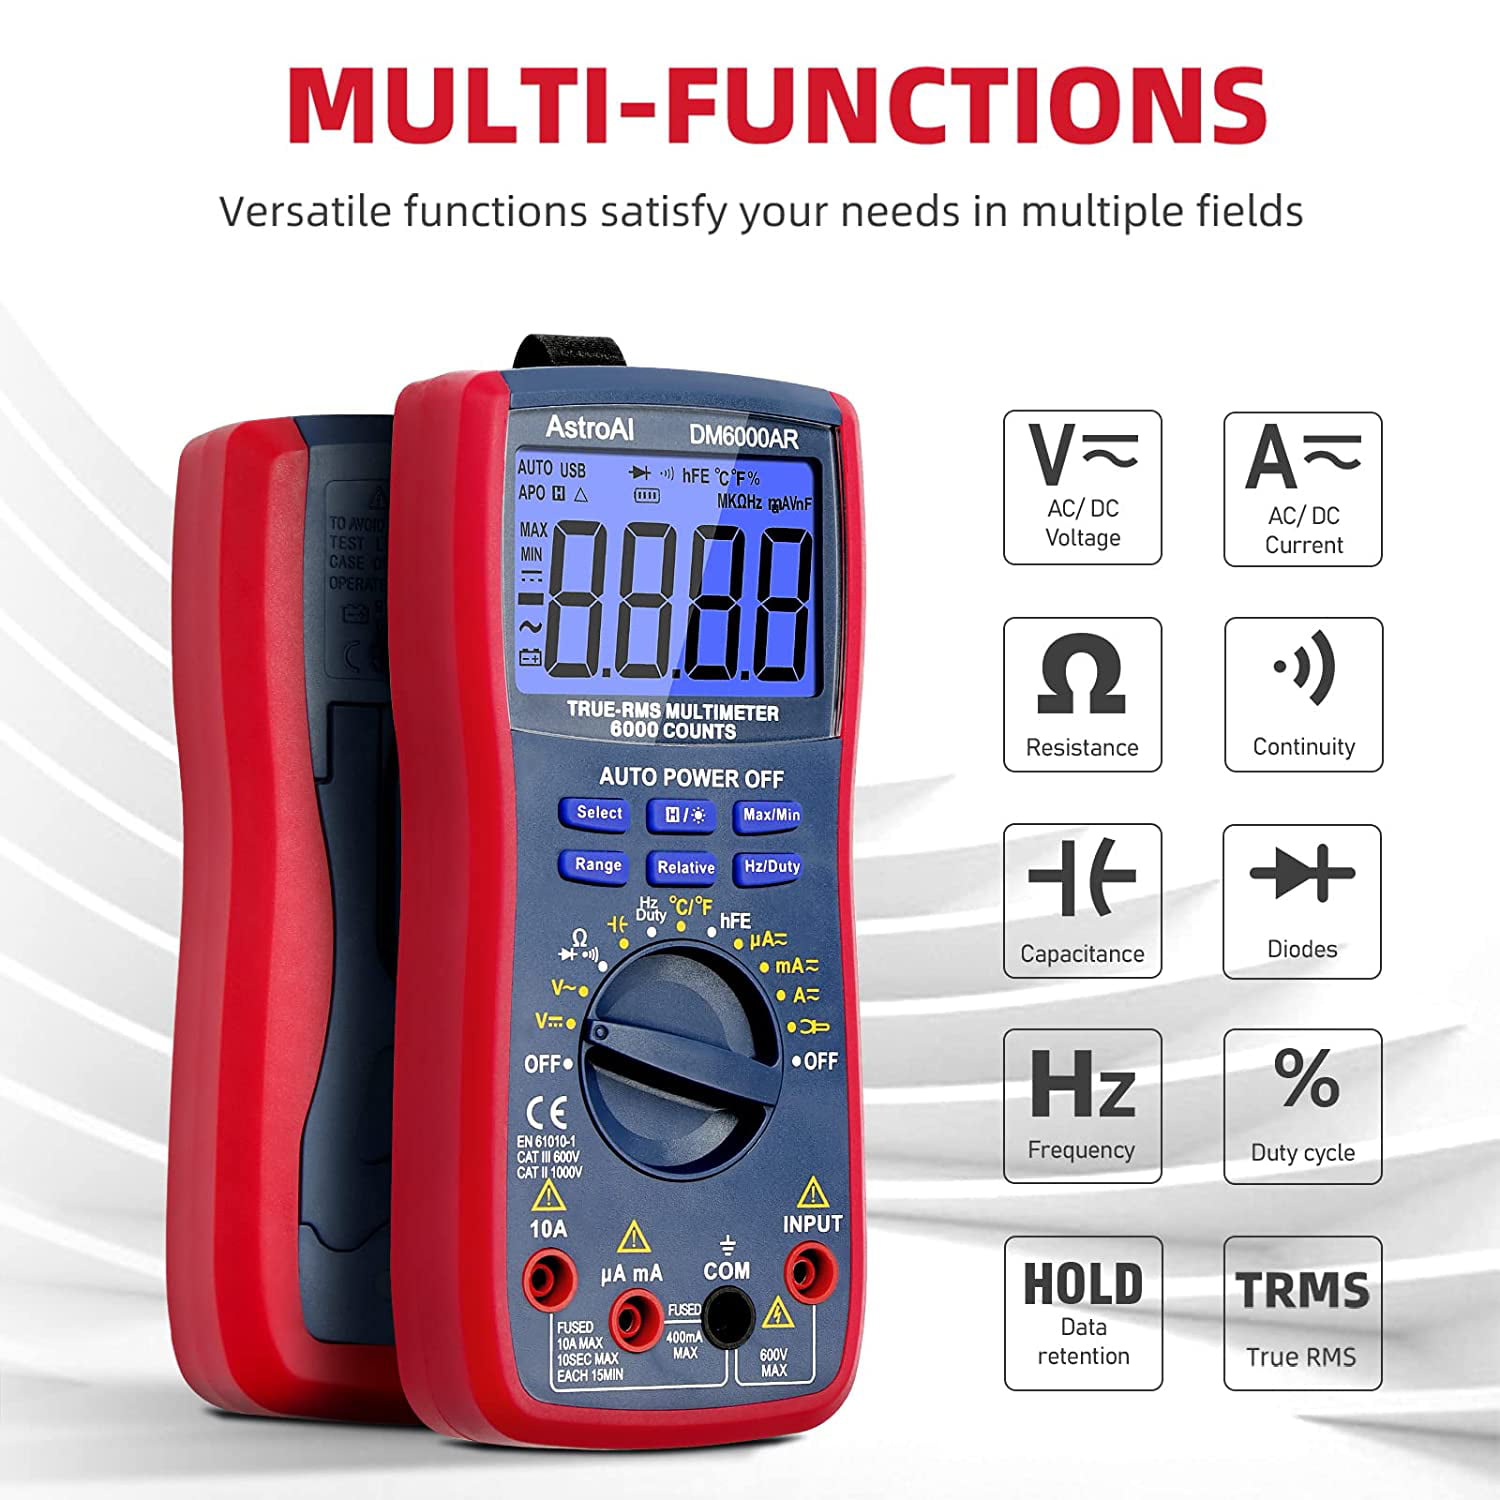 Volt Meter 6000 Counts Auto-Ranging LCD Large Screen for Auto Pro Multimeter Tester AC/DC Voltage/NCV/Resistance/Capacitance/Diode/Frequency Vafany Digital Multimeter with Voice Recognition Control 